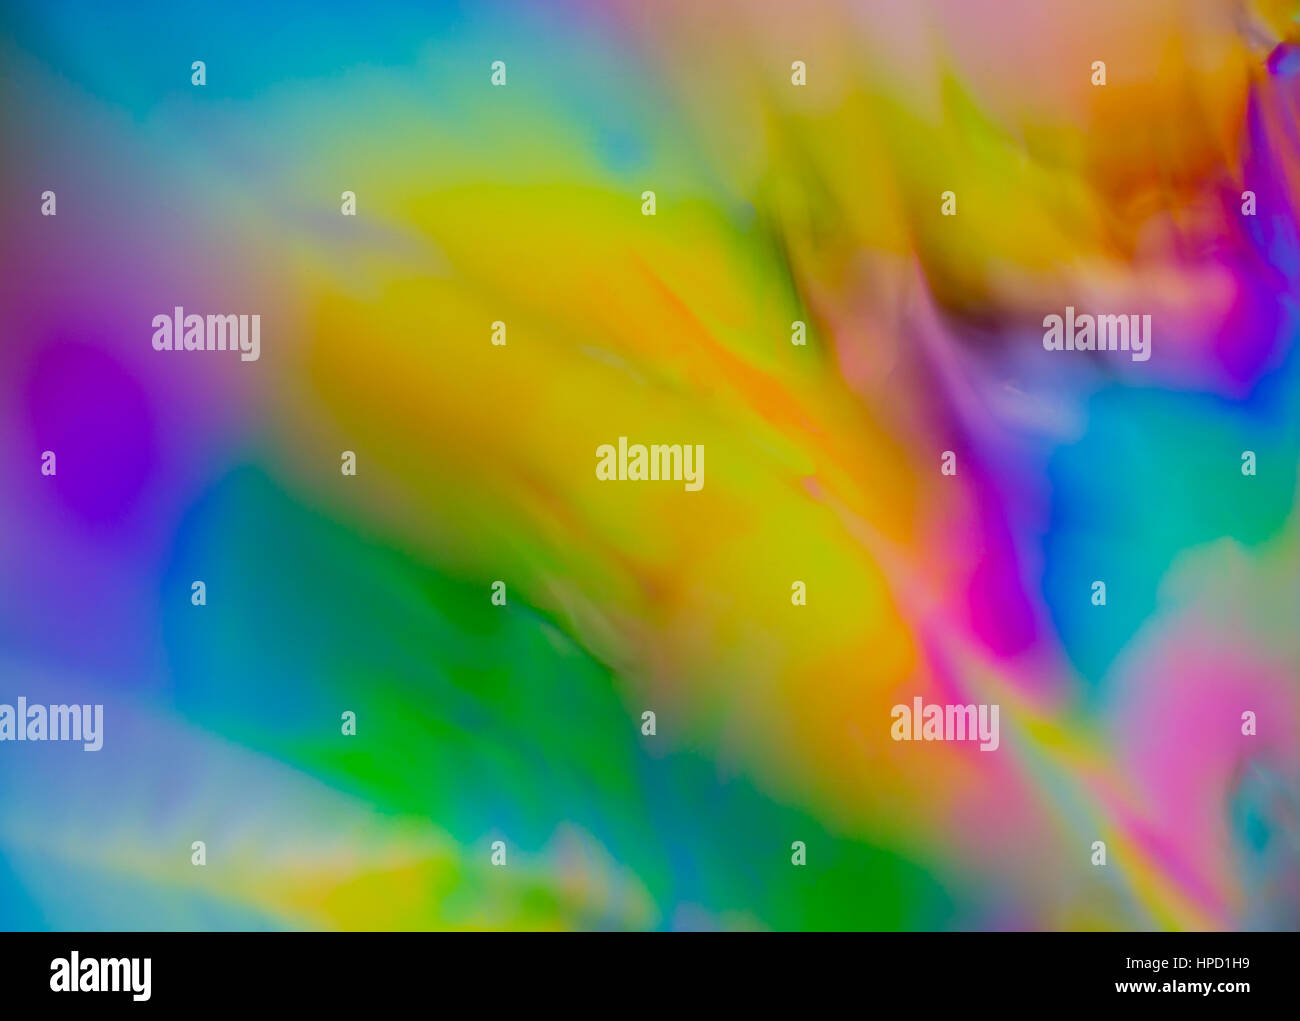 Colorful psychedelic blur showing stress distribution in plastic using ...